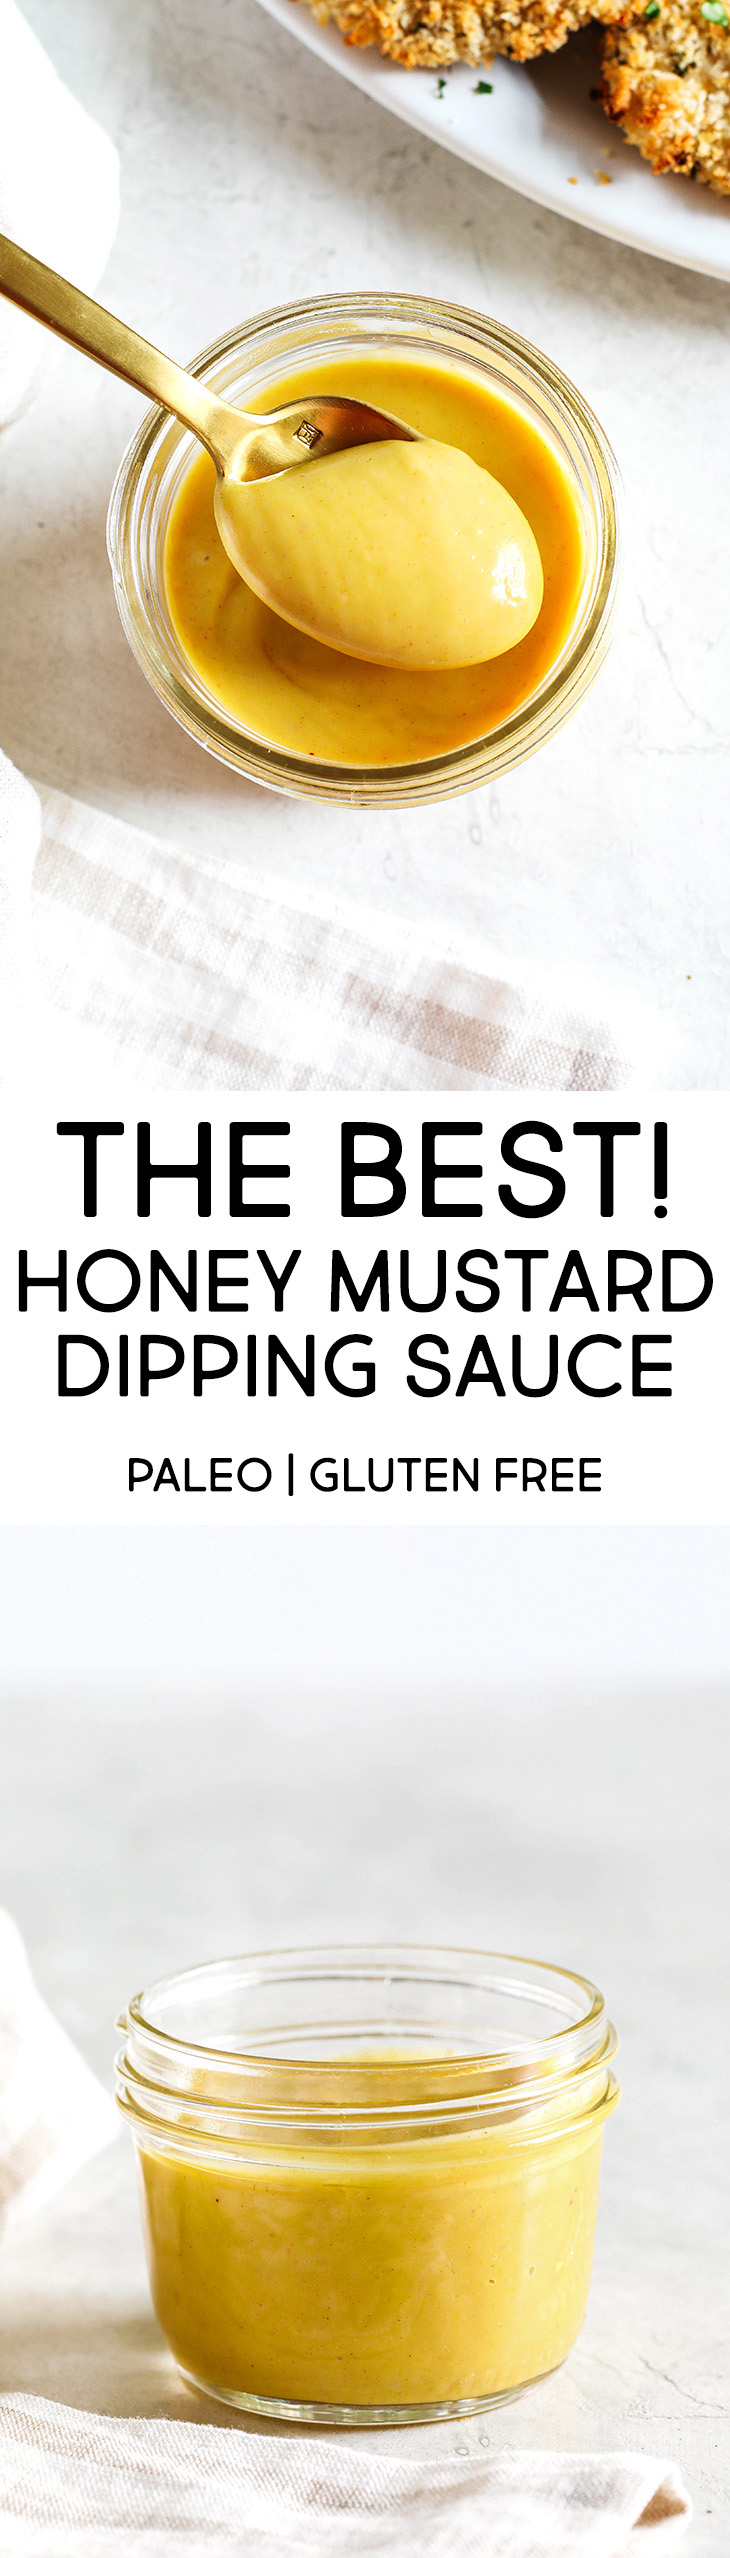 Creamy homemade Honey Mustard Sauce easily made in just minutes with a few simple ingredients perfect for dipping chicken tenders, fries, veggies, and more!